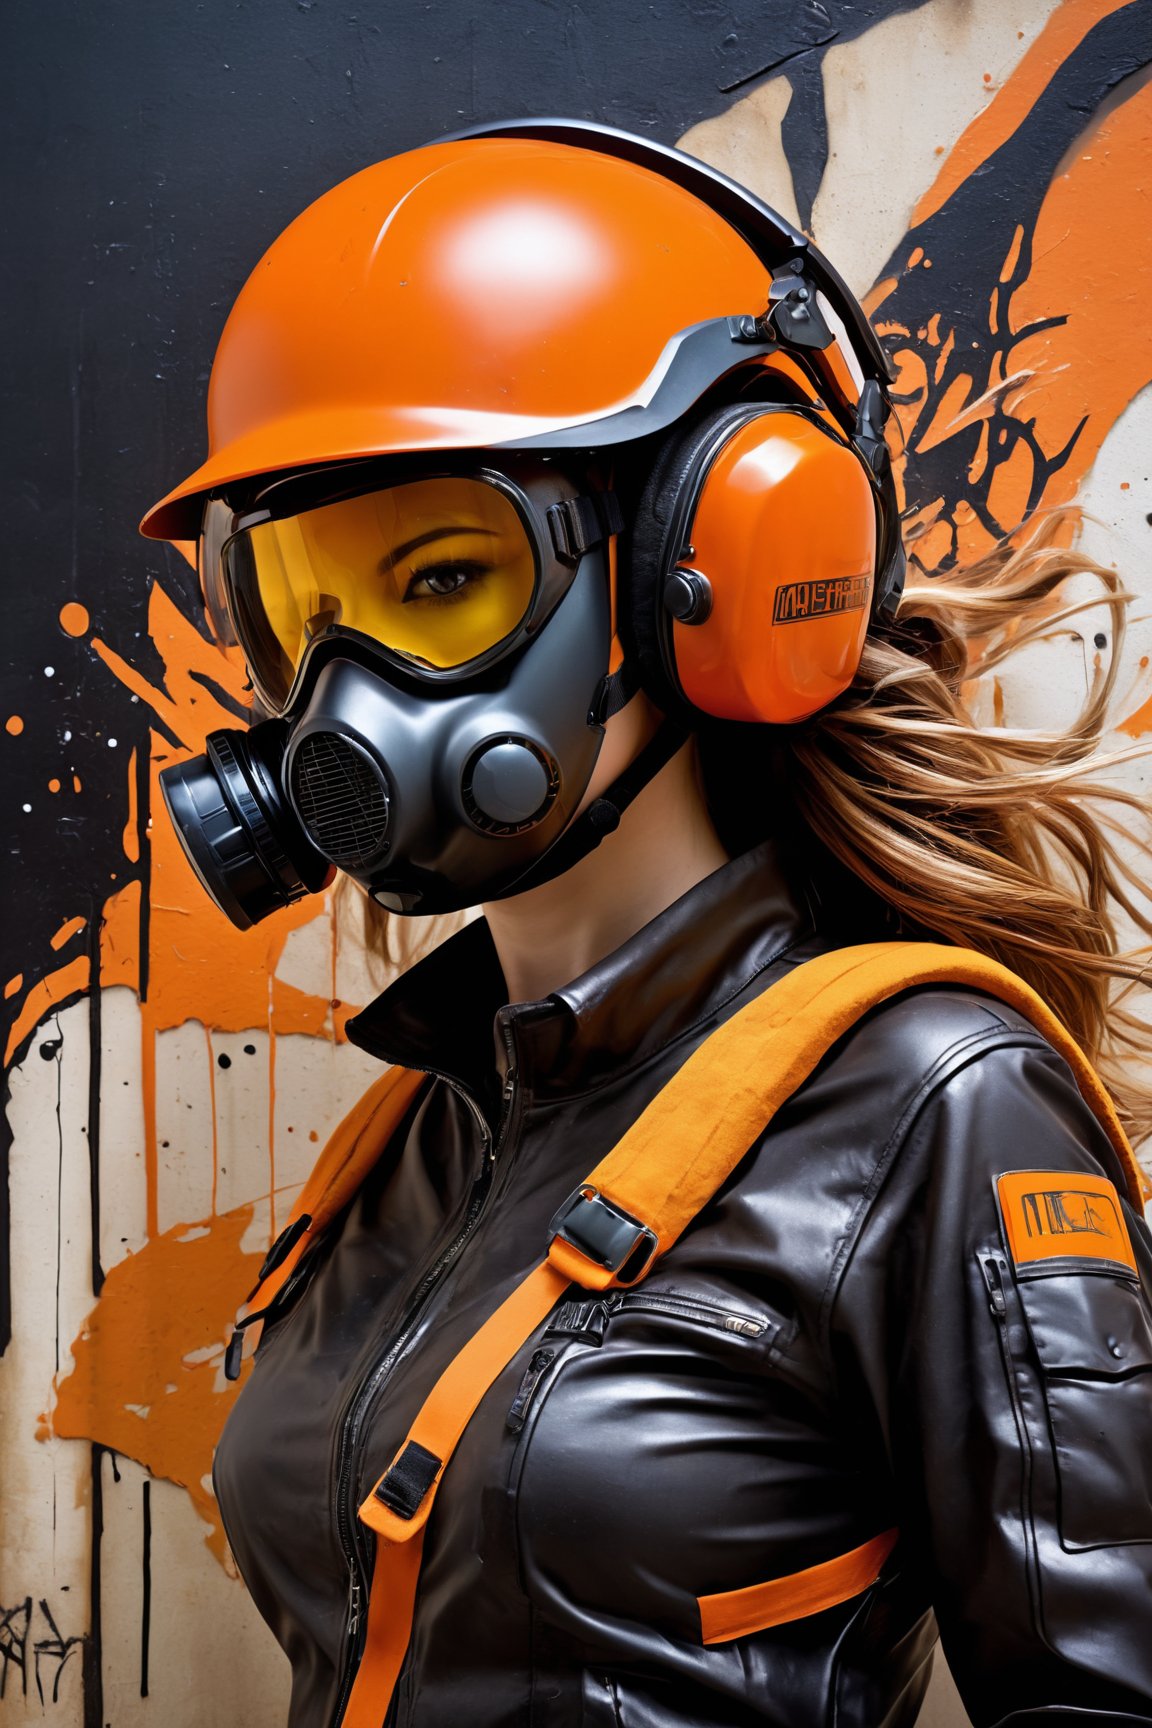 (best quality,highres,masterpiece:1.2),ultra-detailed,(realistic,photo-realistic:1.37),electronic woman with a pest control helmet and mask,dark black and orange, spray painted realism,graphic novel,melting abstract brushstrokes,meticulous detailing,vibrant colors,dynamic composition,light and shadow contrast,industrial backdrop,gritty atmosphere,stylized graffiti,urban decay,sharp lines,strong outlines,modern technology,experimental art,mysterious aura,expressive emotions,uncanny realism,subtle textures,dramatic lighting,striking visual impact,vivid storytelling,immersive aesthetics,strong visual narrative,action-packed scene,innovative visual perspective,pop art influence,edgy and futuristic,hauntingly beautiful,otherworldly presence,post-apocalyptic vibes,eerie ambiance,unexpected juxtapositions,graceful movement,electrifying energy